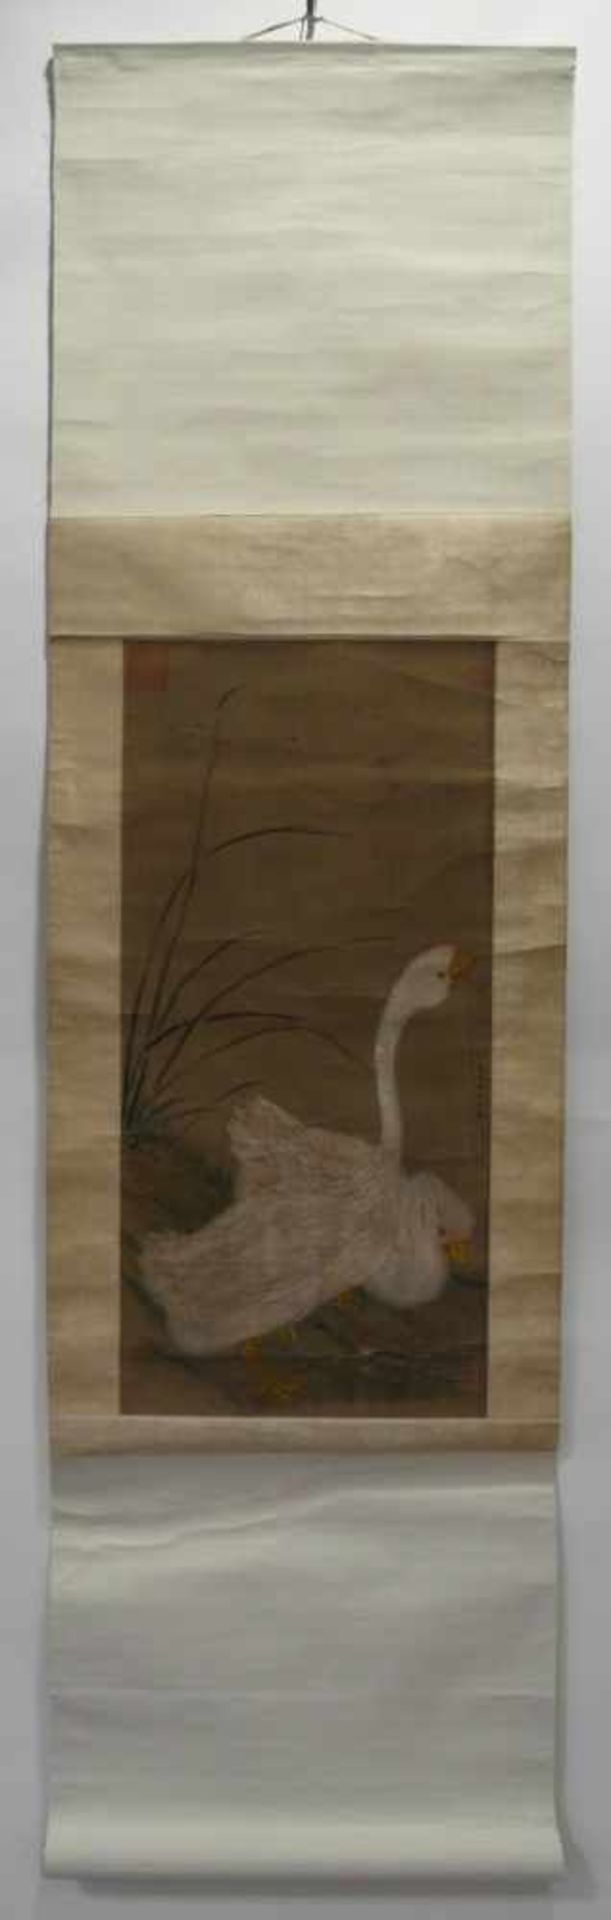 LUO, YIGUI. A pair of ducks in lotus pond. China. Cyclically dated 1934. Ink and colors on paper. - Bild 3 aus 3